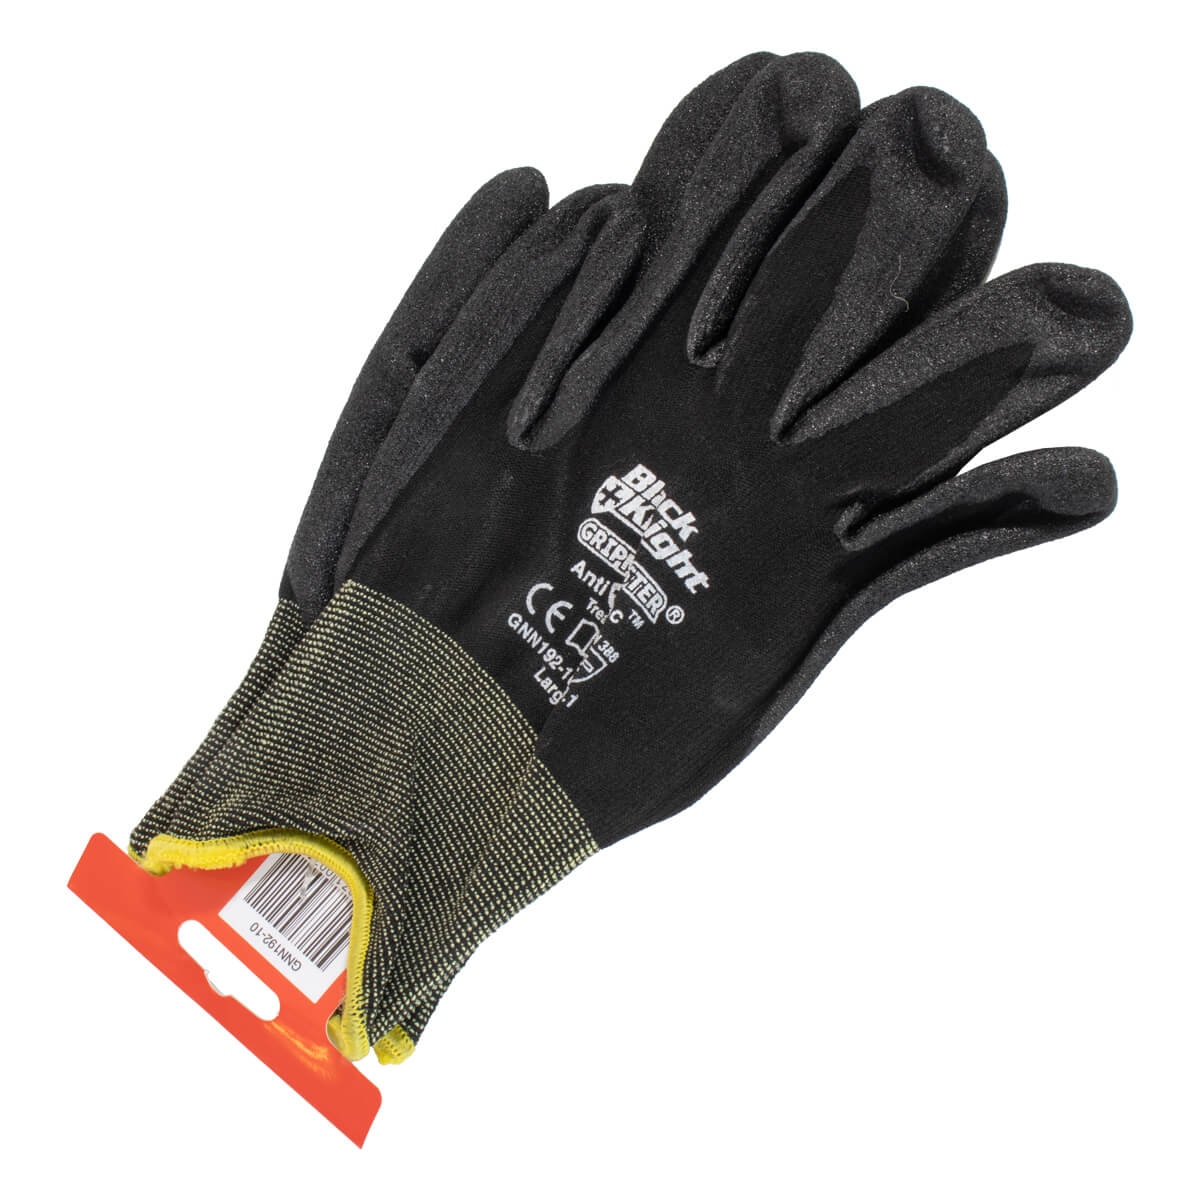 Gloves Synthetic Coated Gripmaster Large MaxiSafe